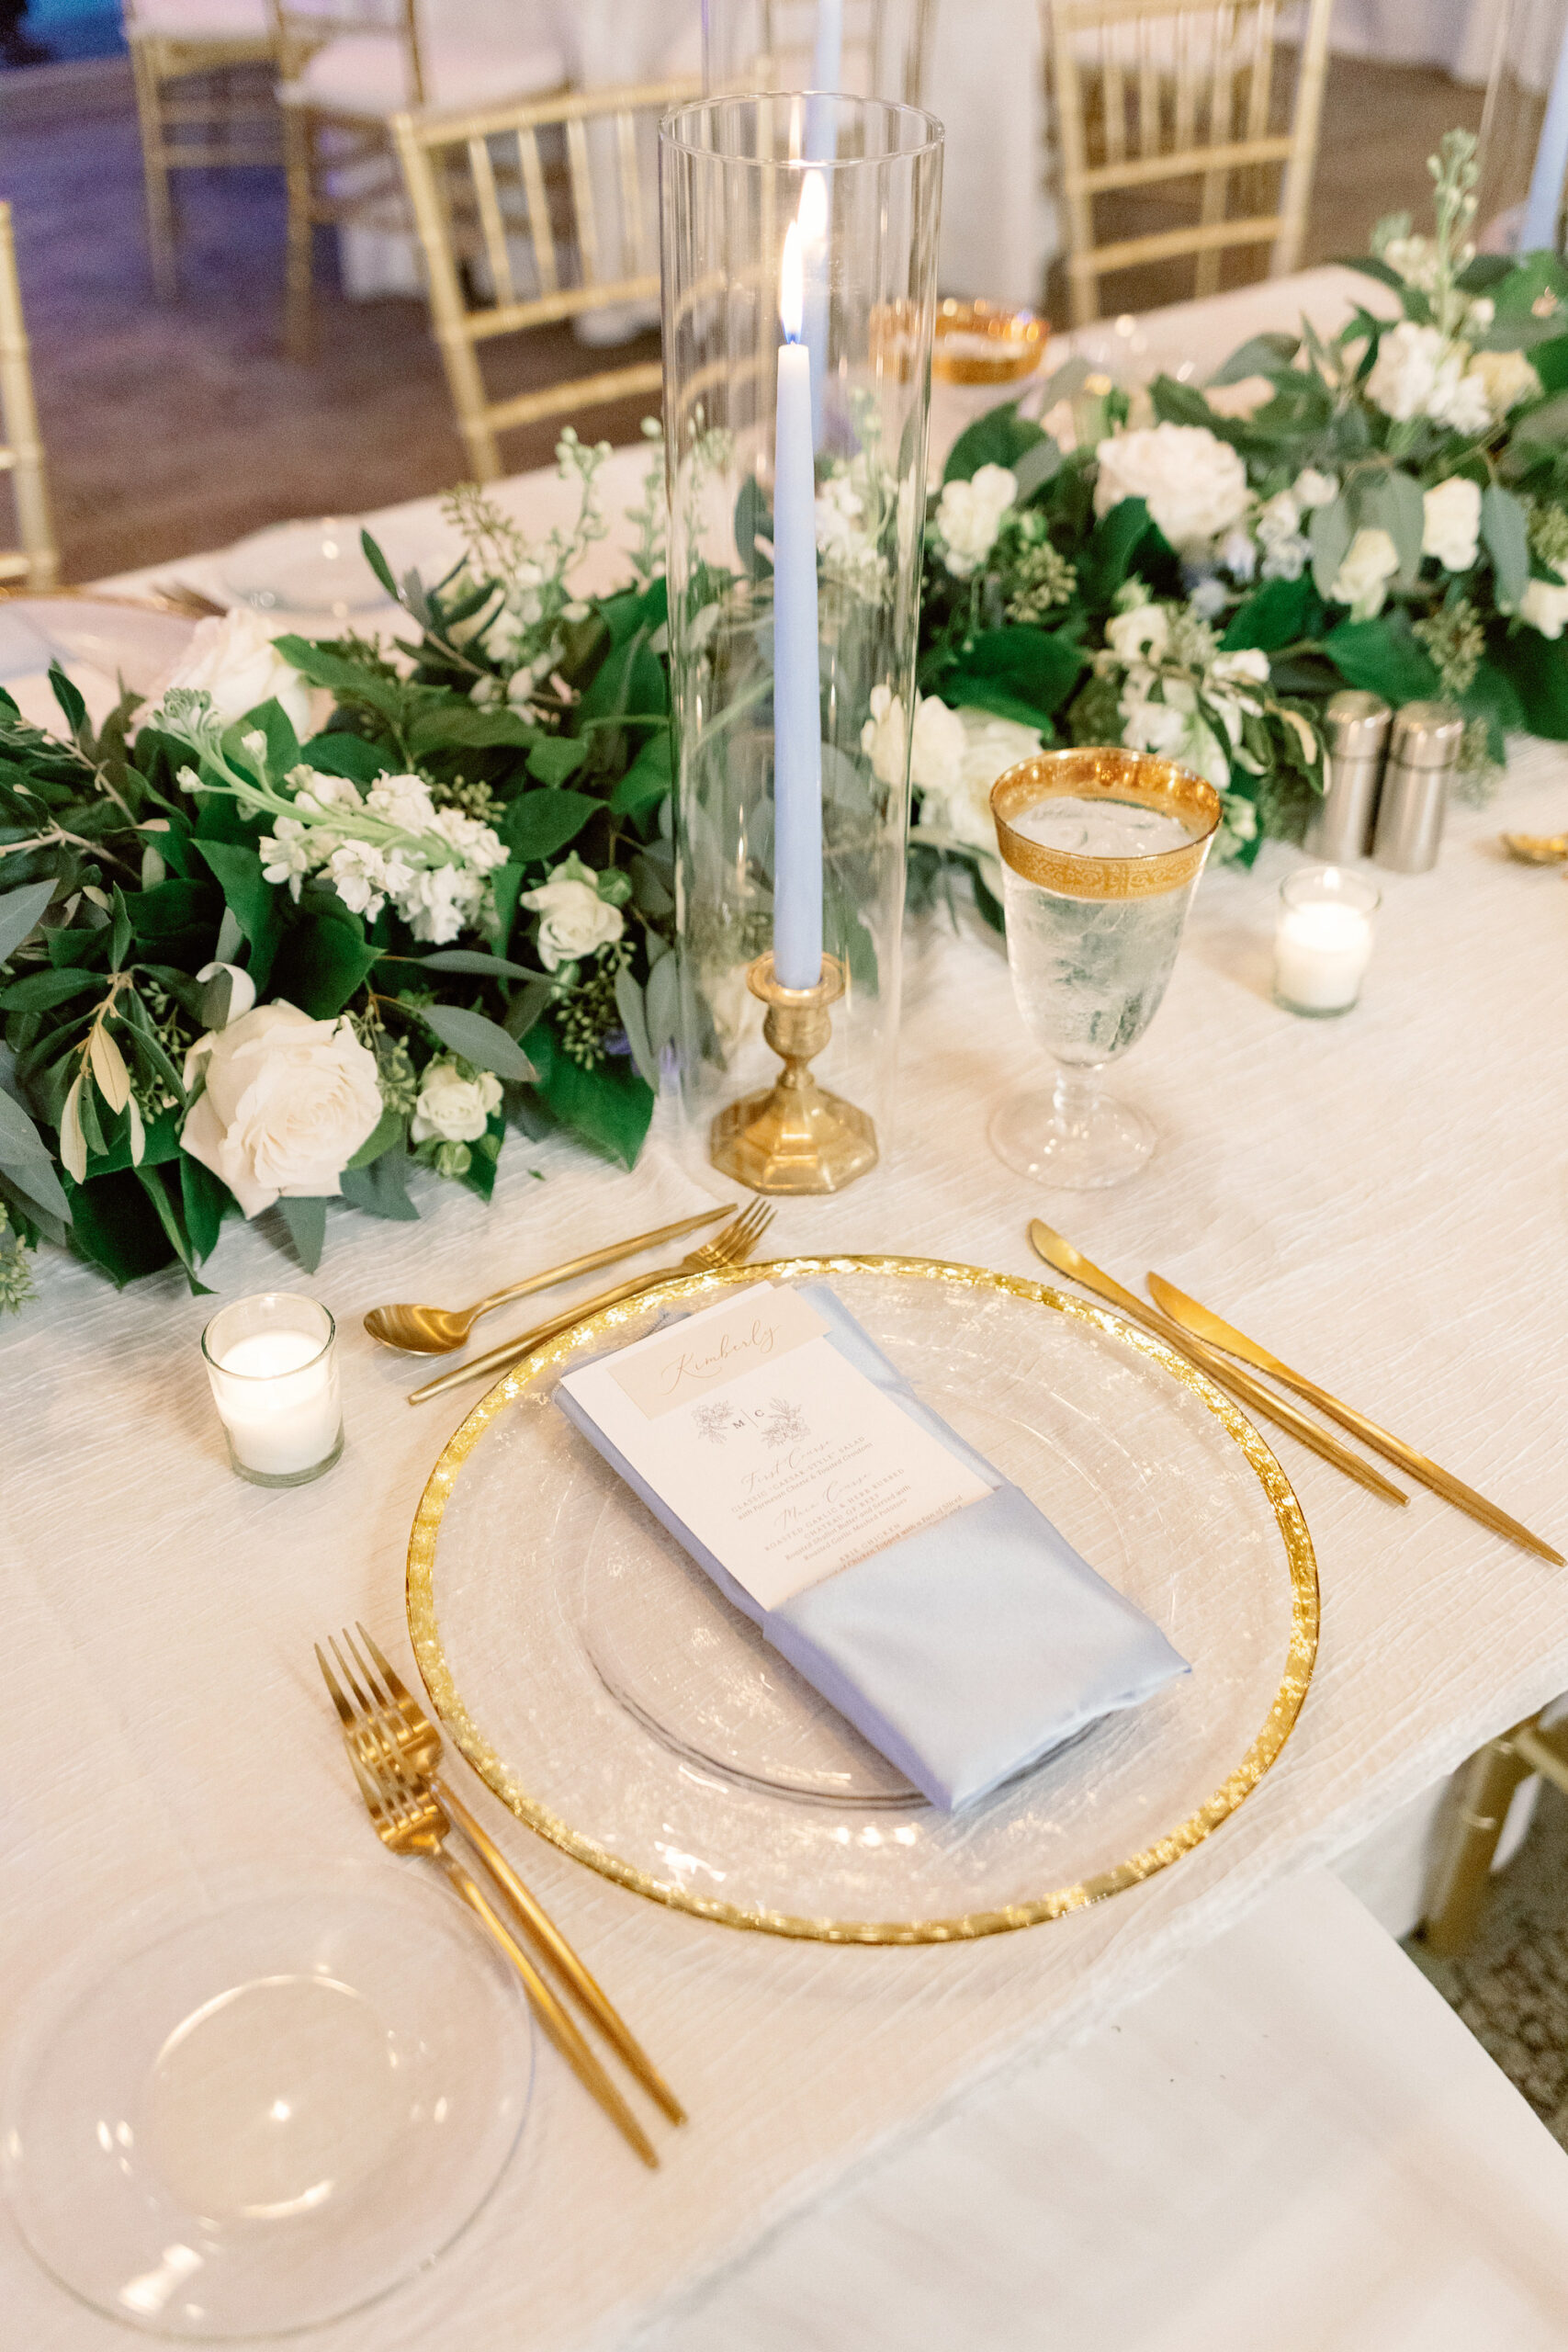 Candlelit Gold Wedding Table Setting with Gold Chargers and Flatware and Greenery Centerpiece | Romantic Classic Reception Decor Ideas